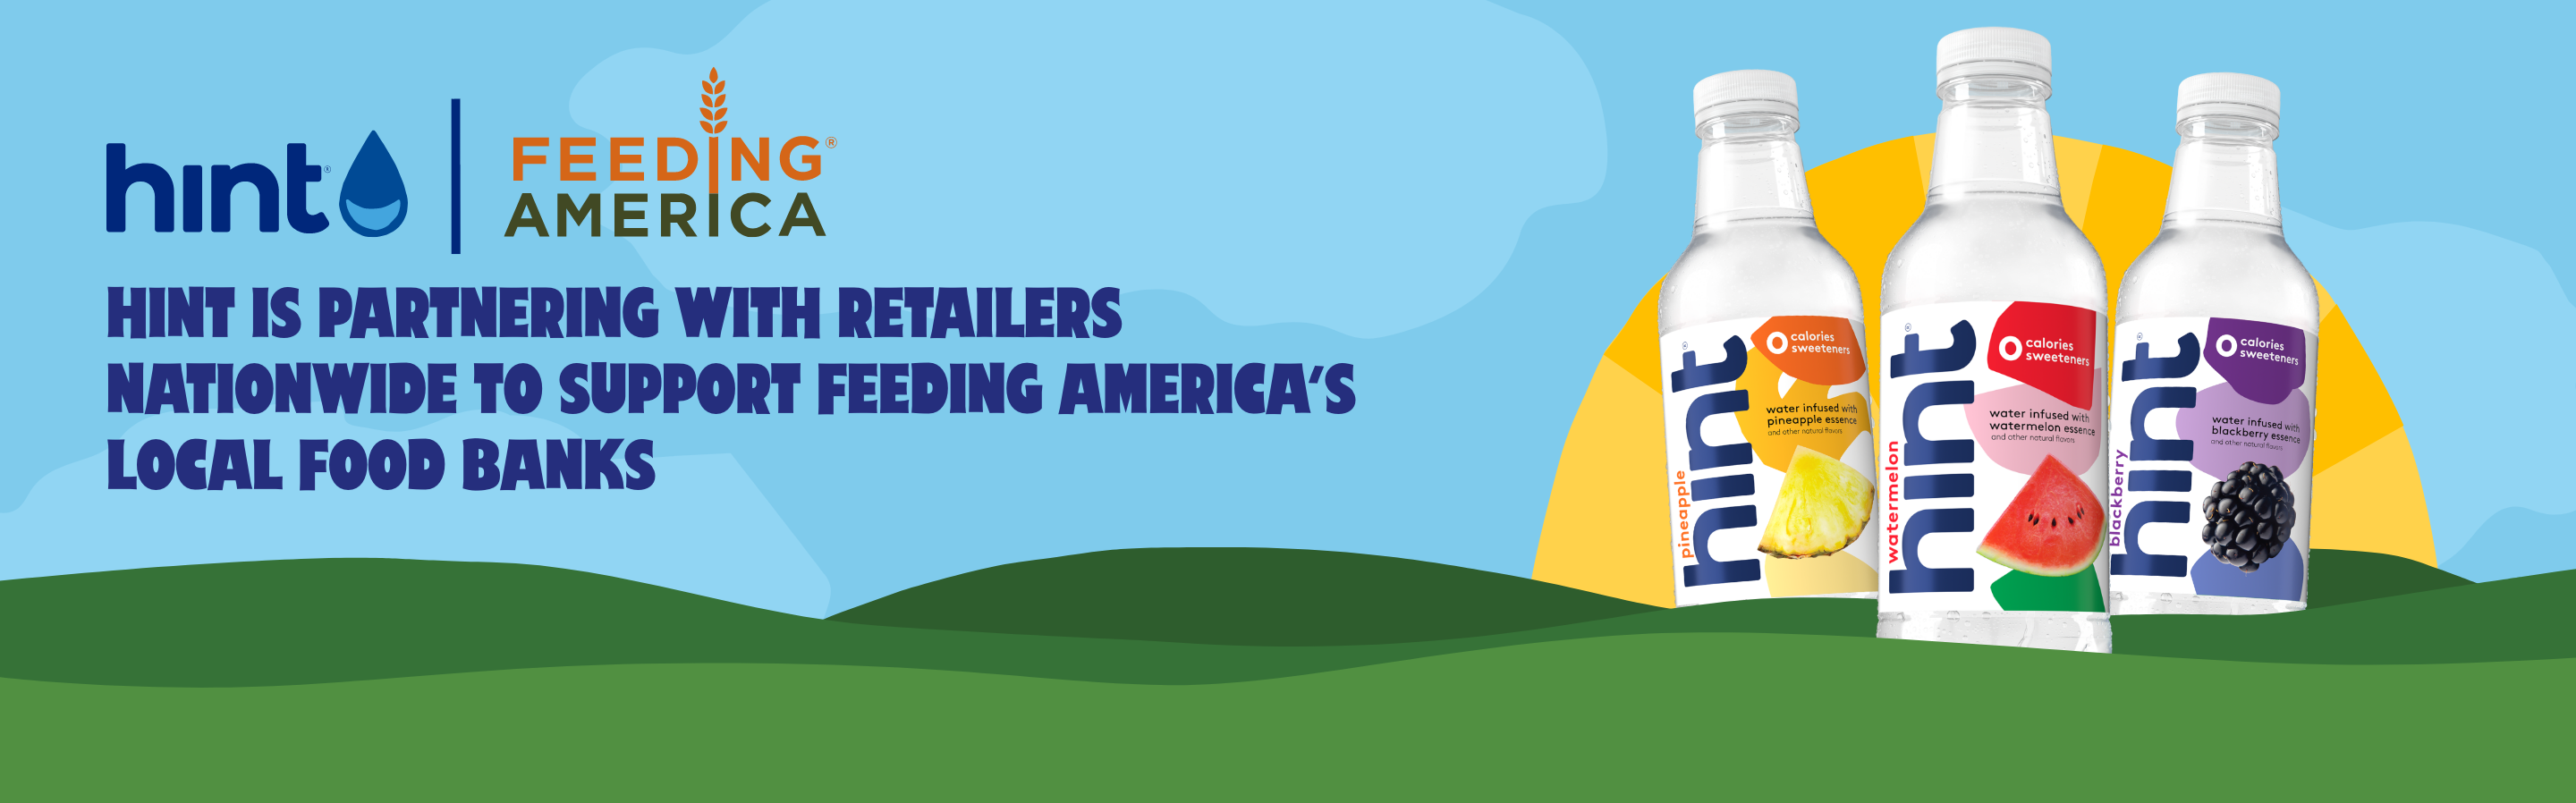 Hint is partnering with retailers nationwide to support feeding america's local food banks